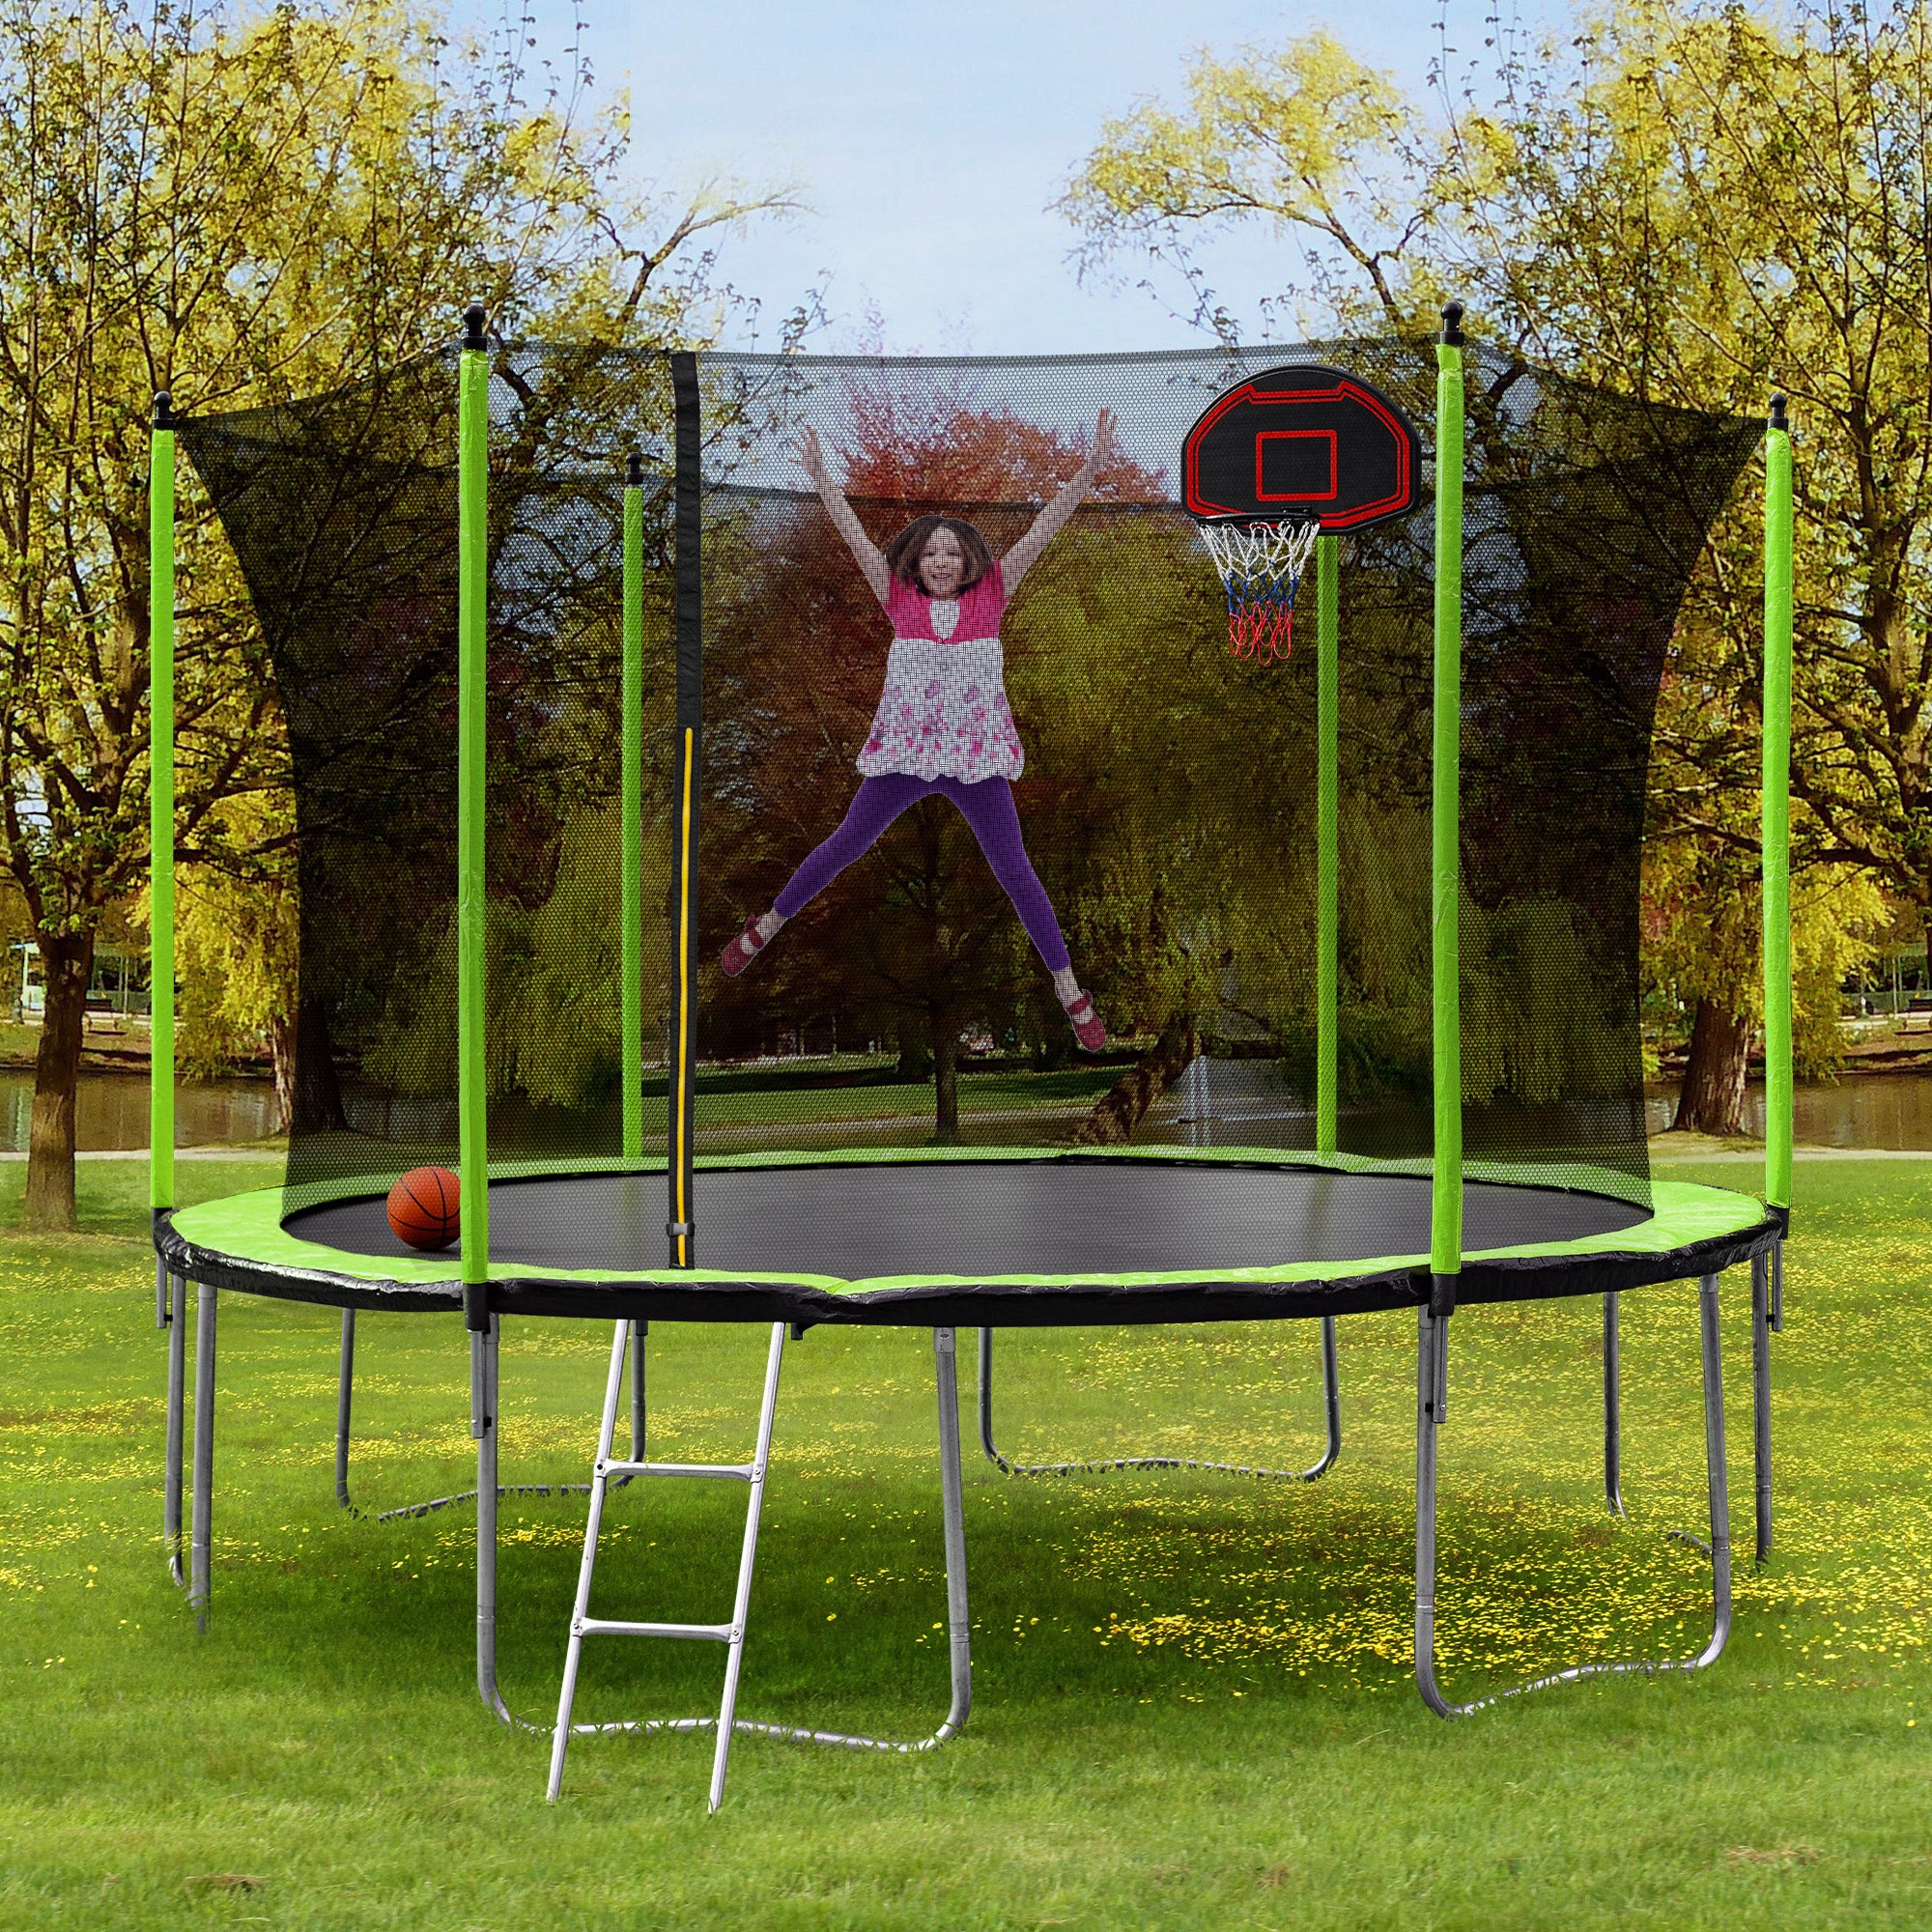 14FT Trampoline with Basketball Hoop Inflator and green-metal